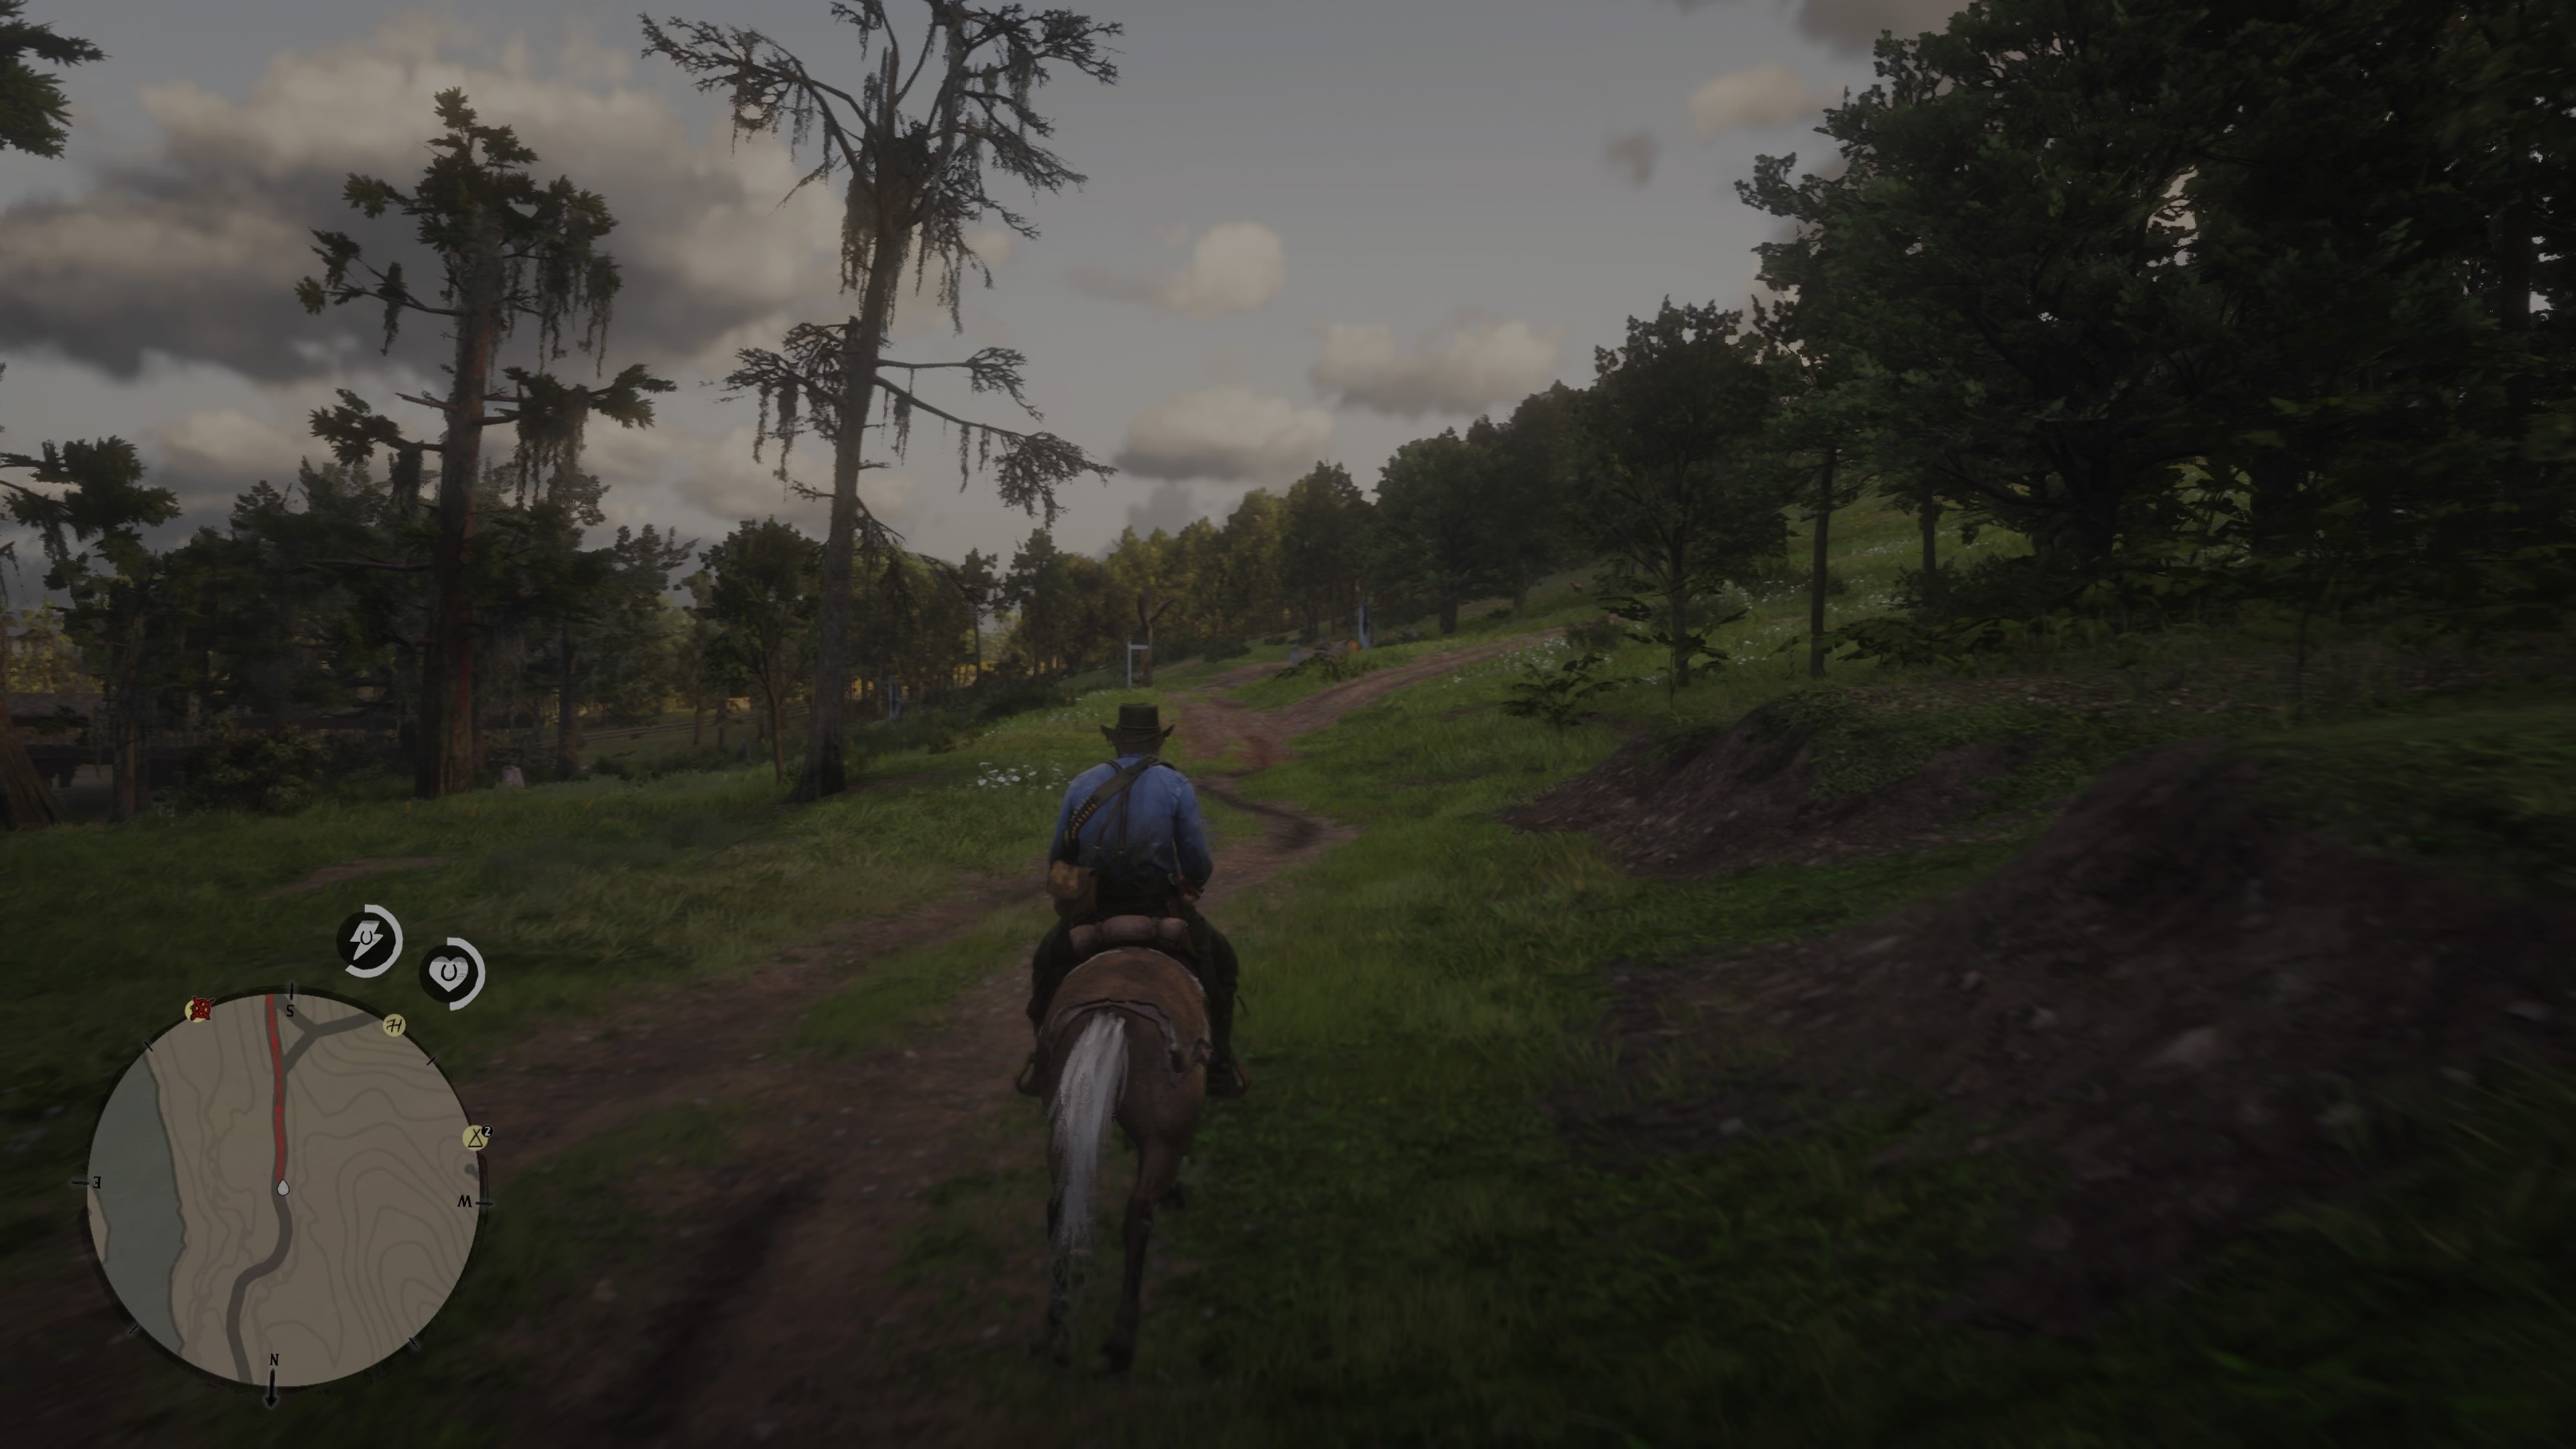 How To Download Red Dead Redemption 2 on PC, Red Dead Redemption 2  Download PC